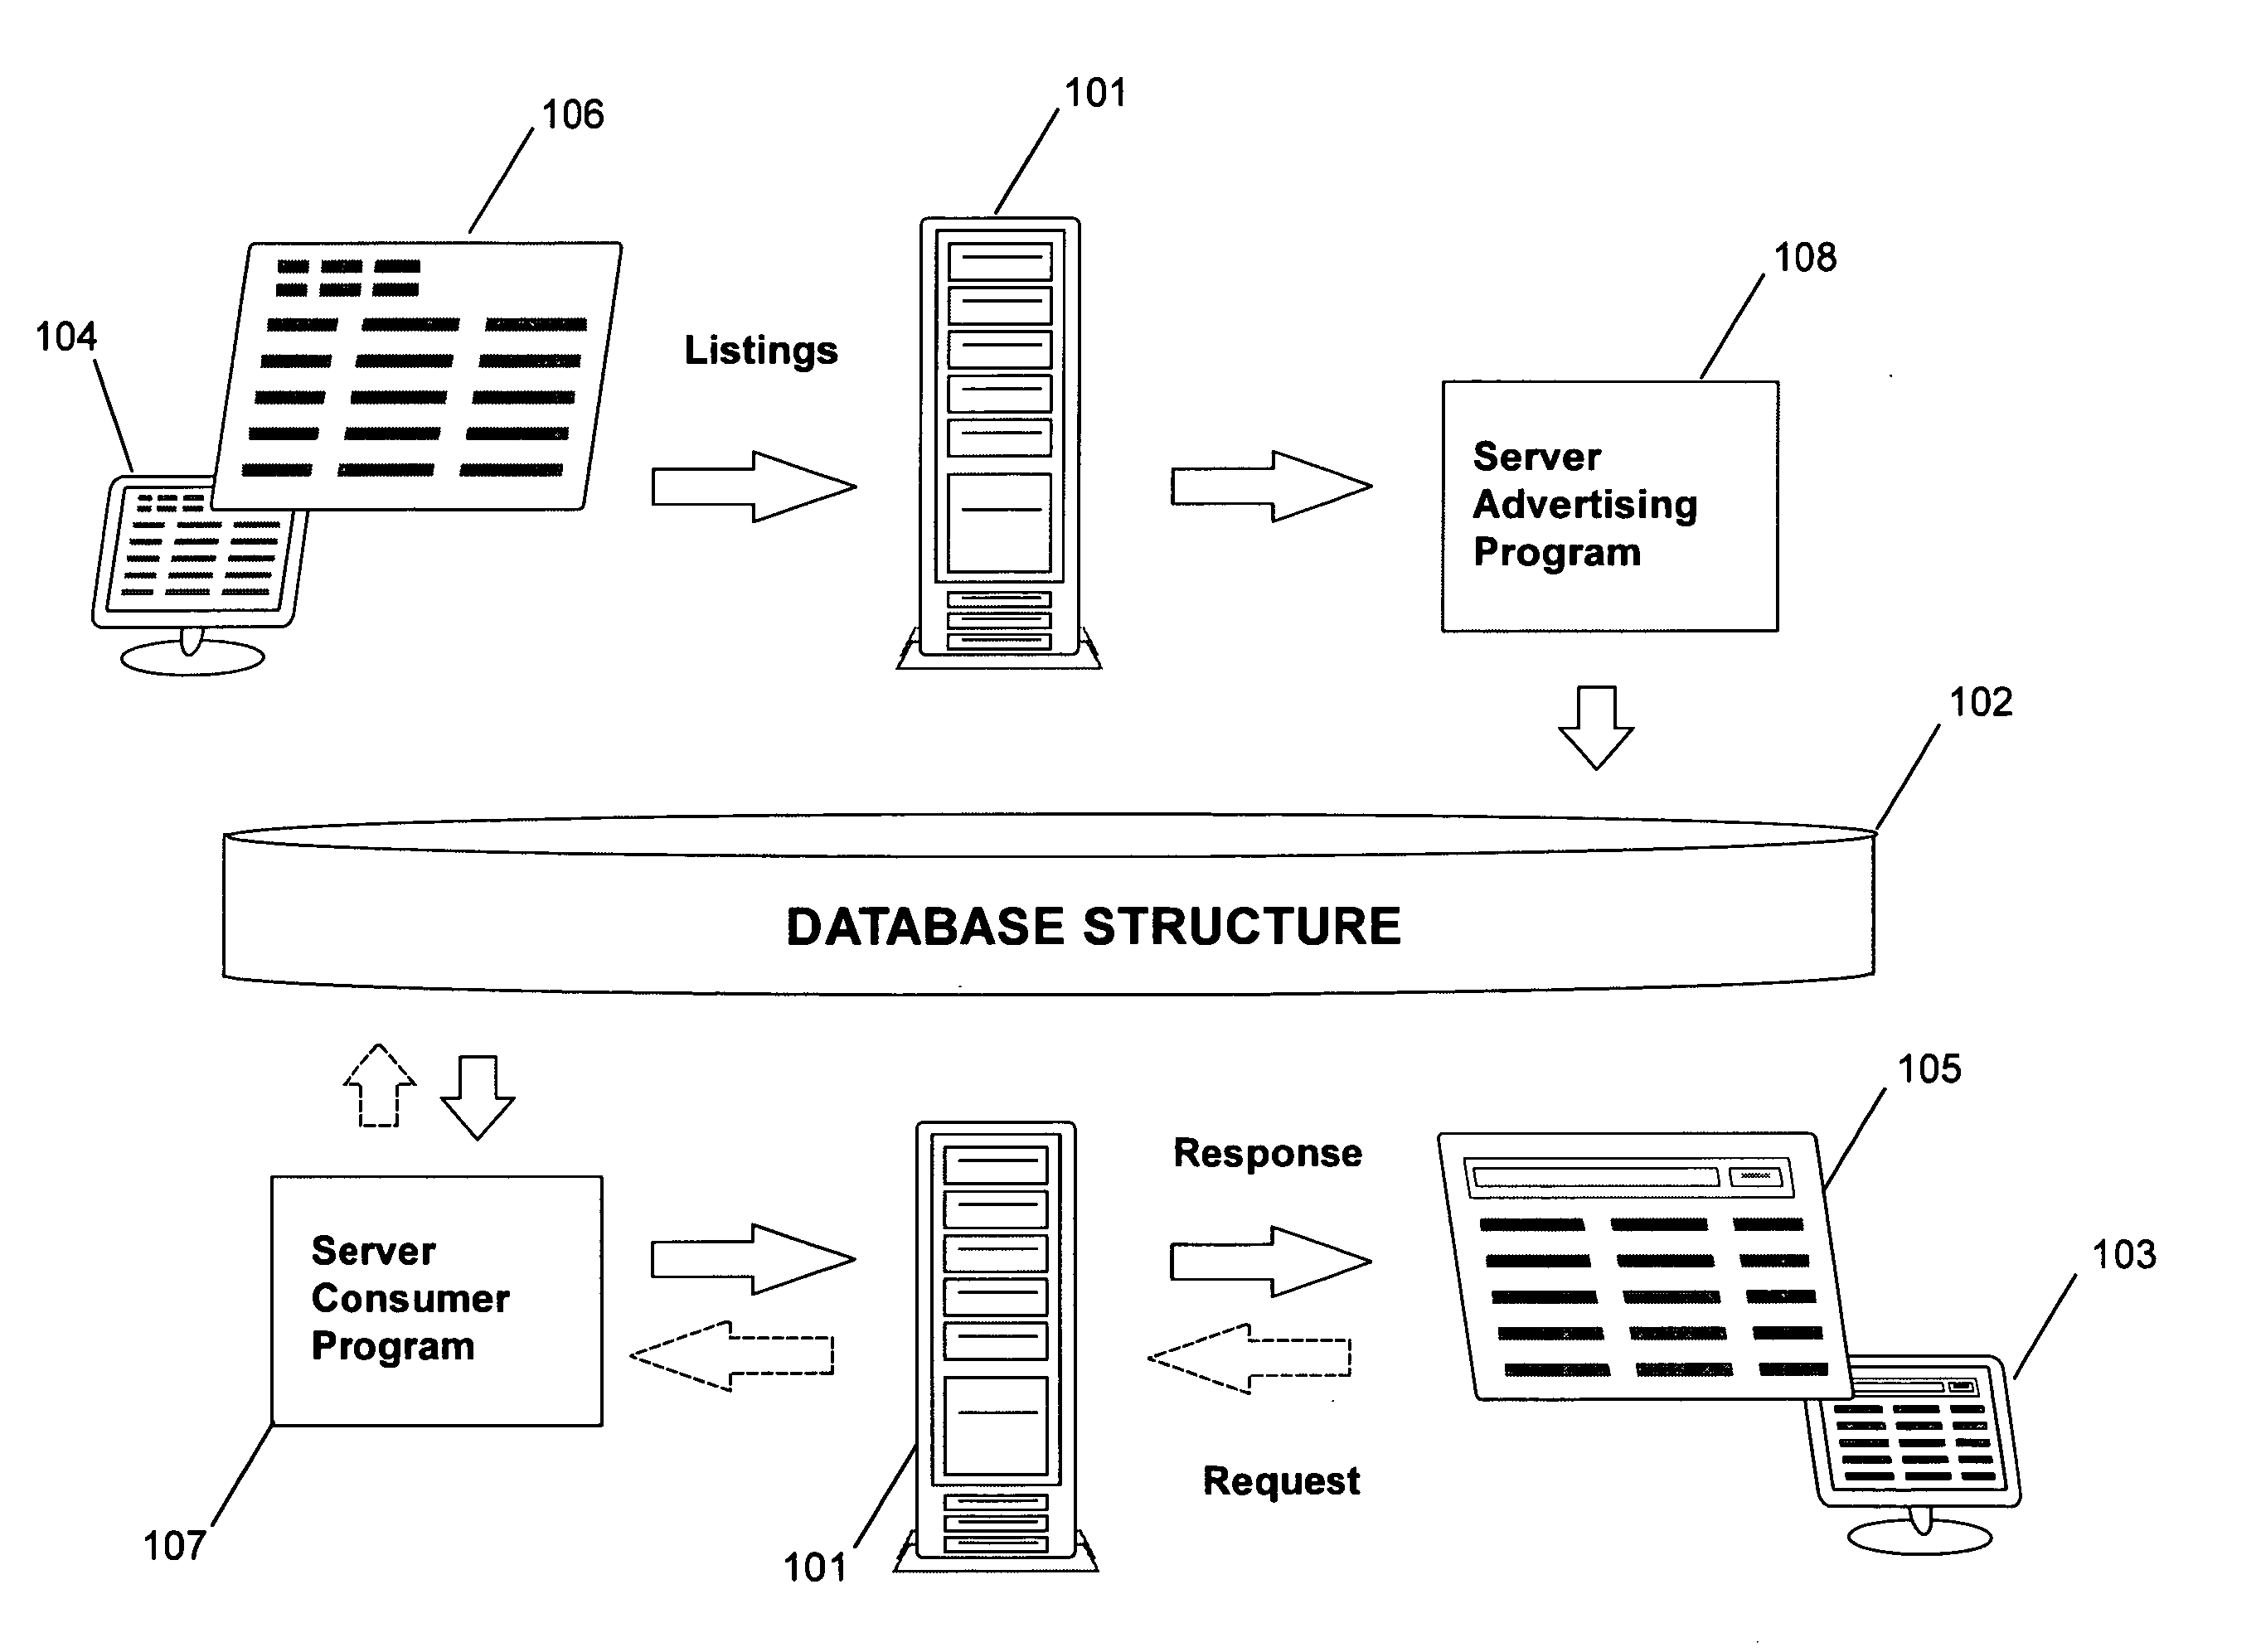 Network information distribution system and a method of advertising and search for supply and demand of products/goods/services in any geographical location